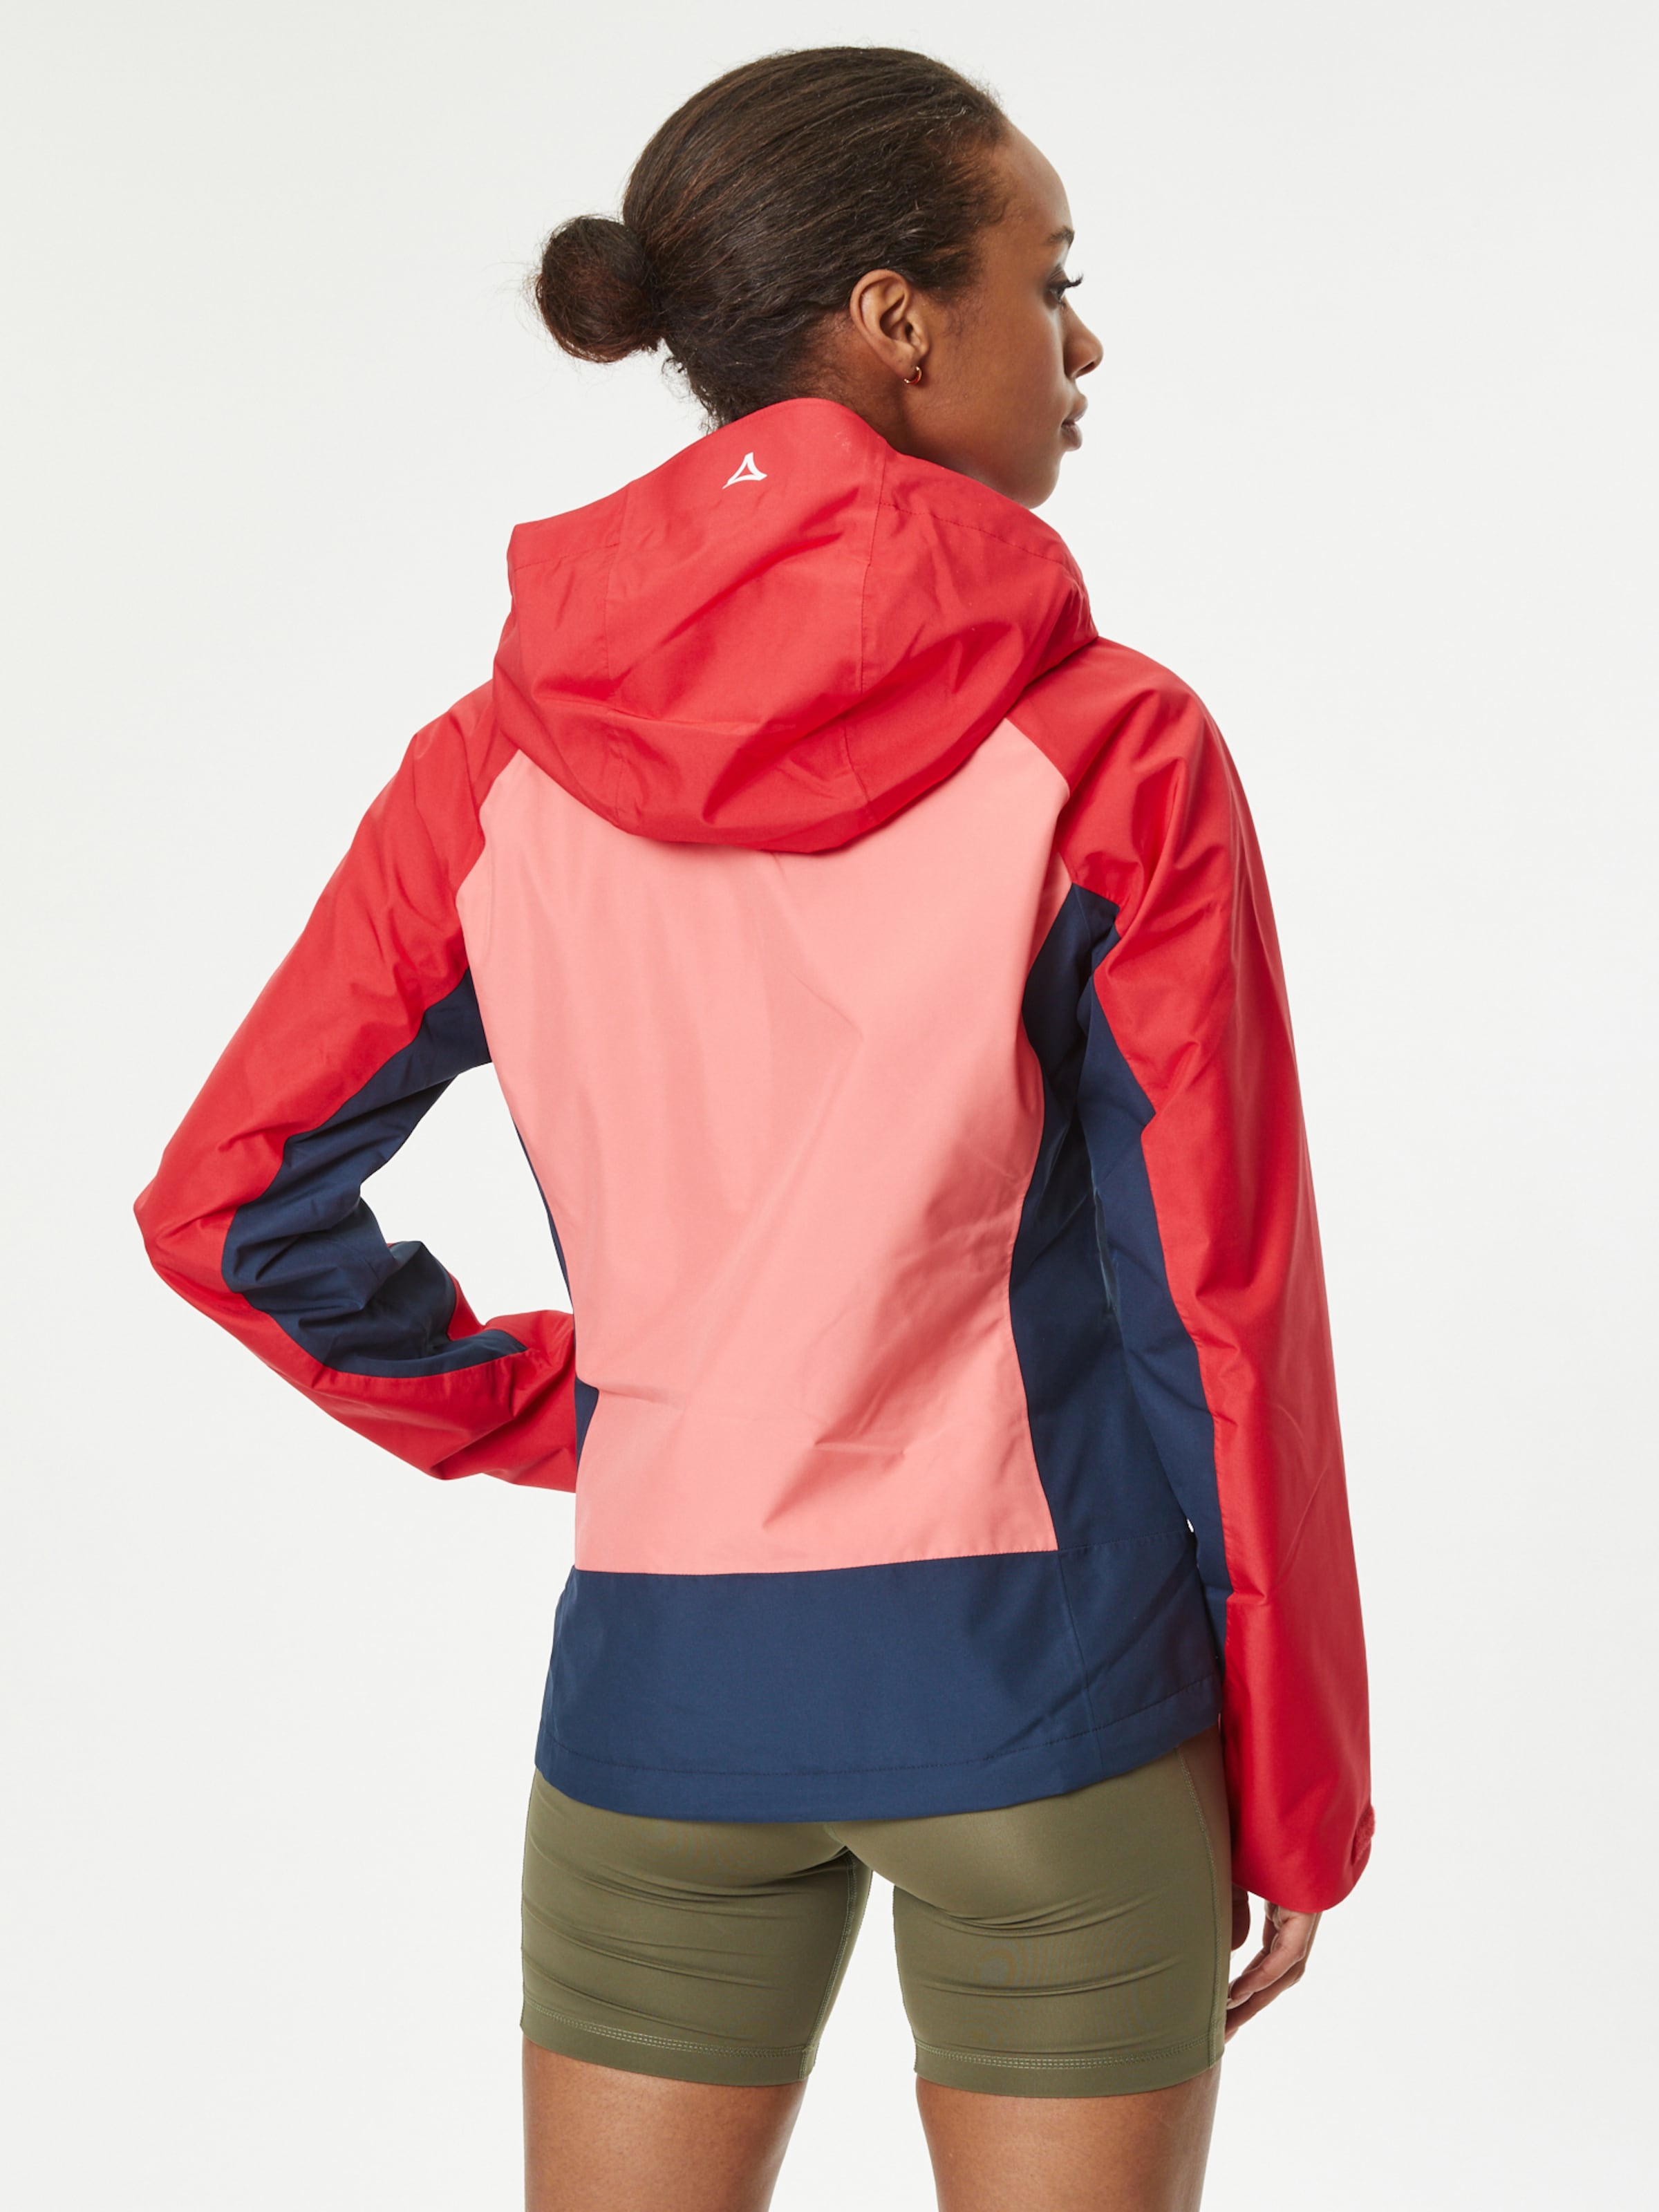 ABOUT Outdoor YOU | \'Wamberg\' in Melon Jacket Schöffel